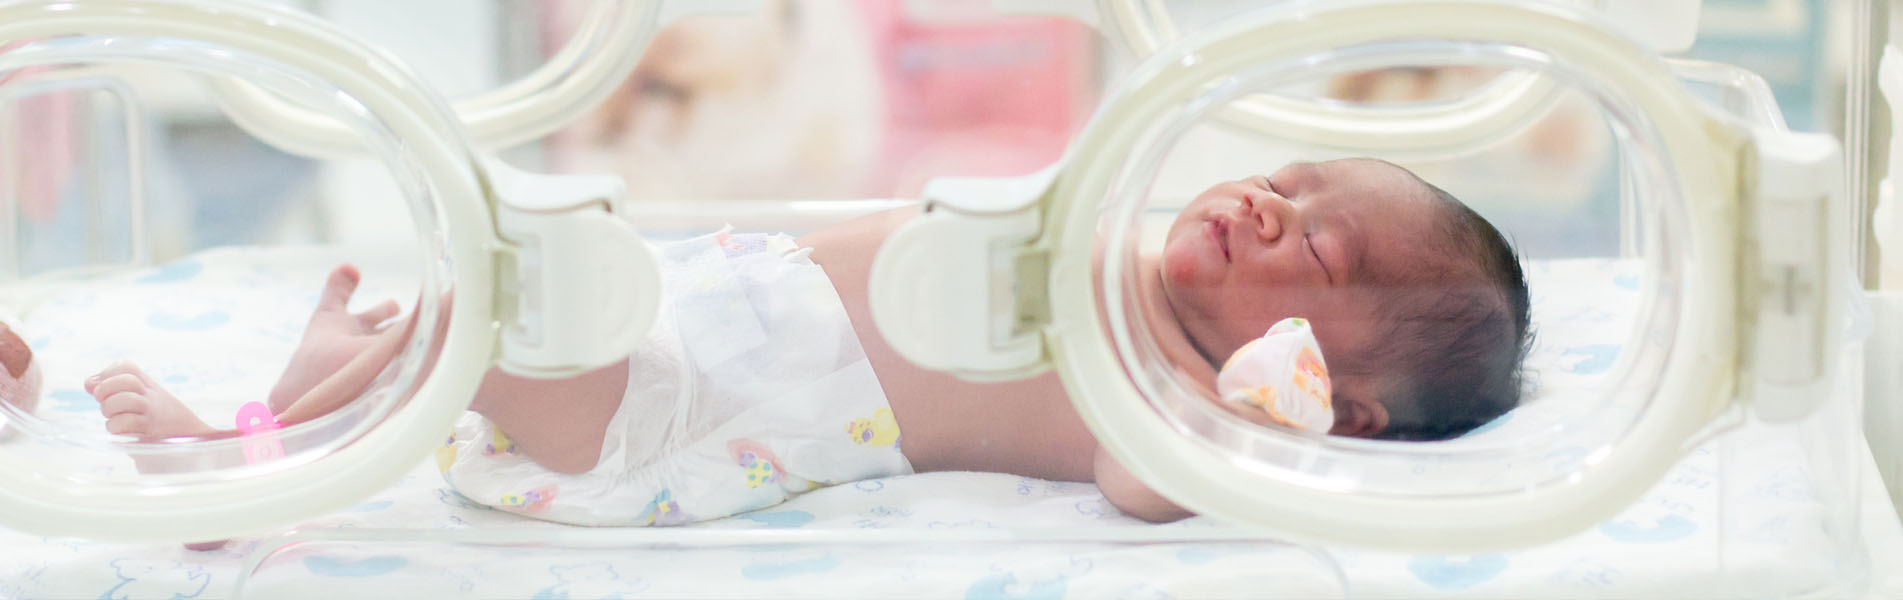 Signs of Cerebral Palsy in Newborns